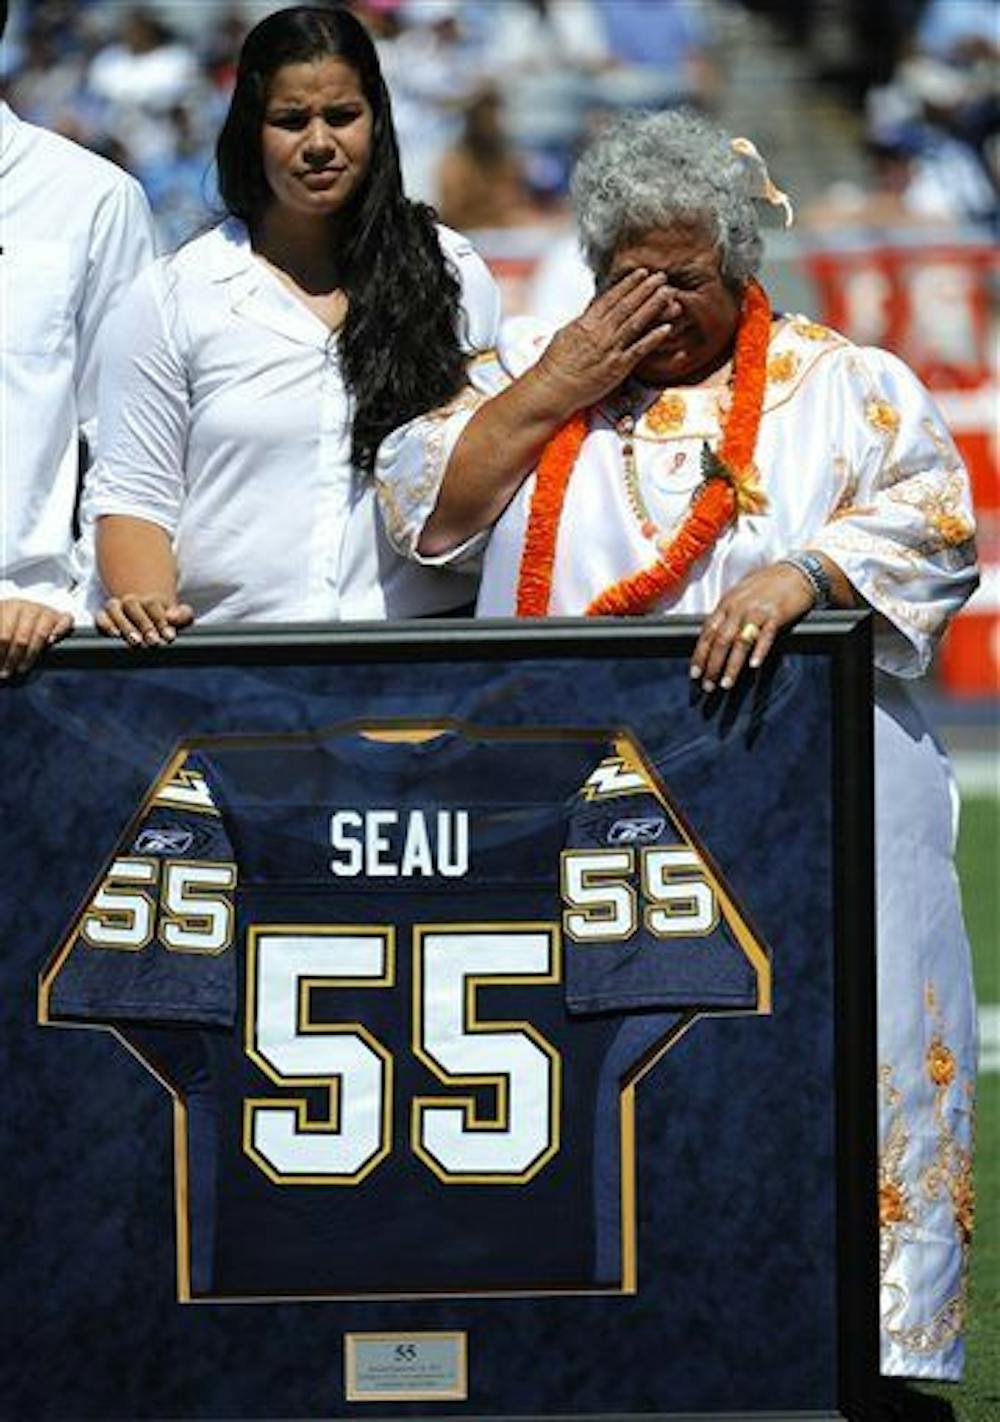 <p>Luisa Seau, right, the mother of former San Diego Chargers linebacker Junior Seau, wipes her eyes during a ceremony on&nbsp;Sept. 16, 2012,&nbsp;to retire Seau's No. 55 uniform before the Chargers play the Tennessee Titans in an NFL football game in San Diego.</p>